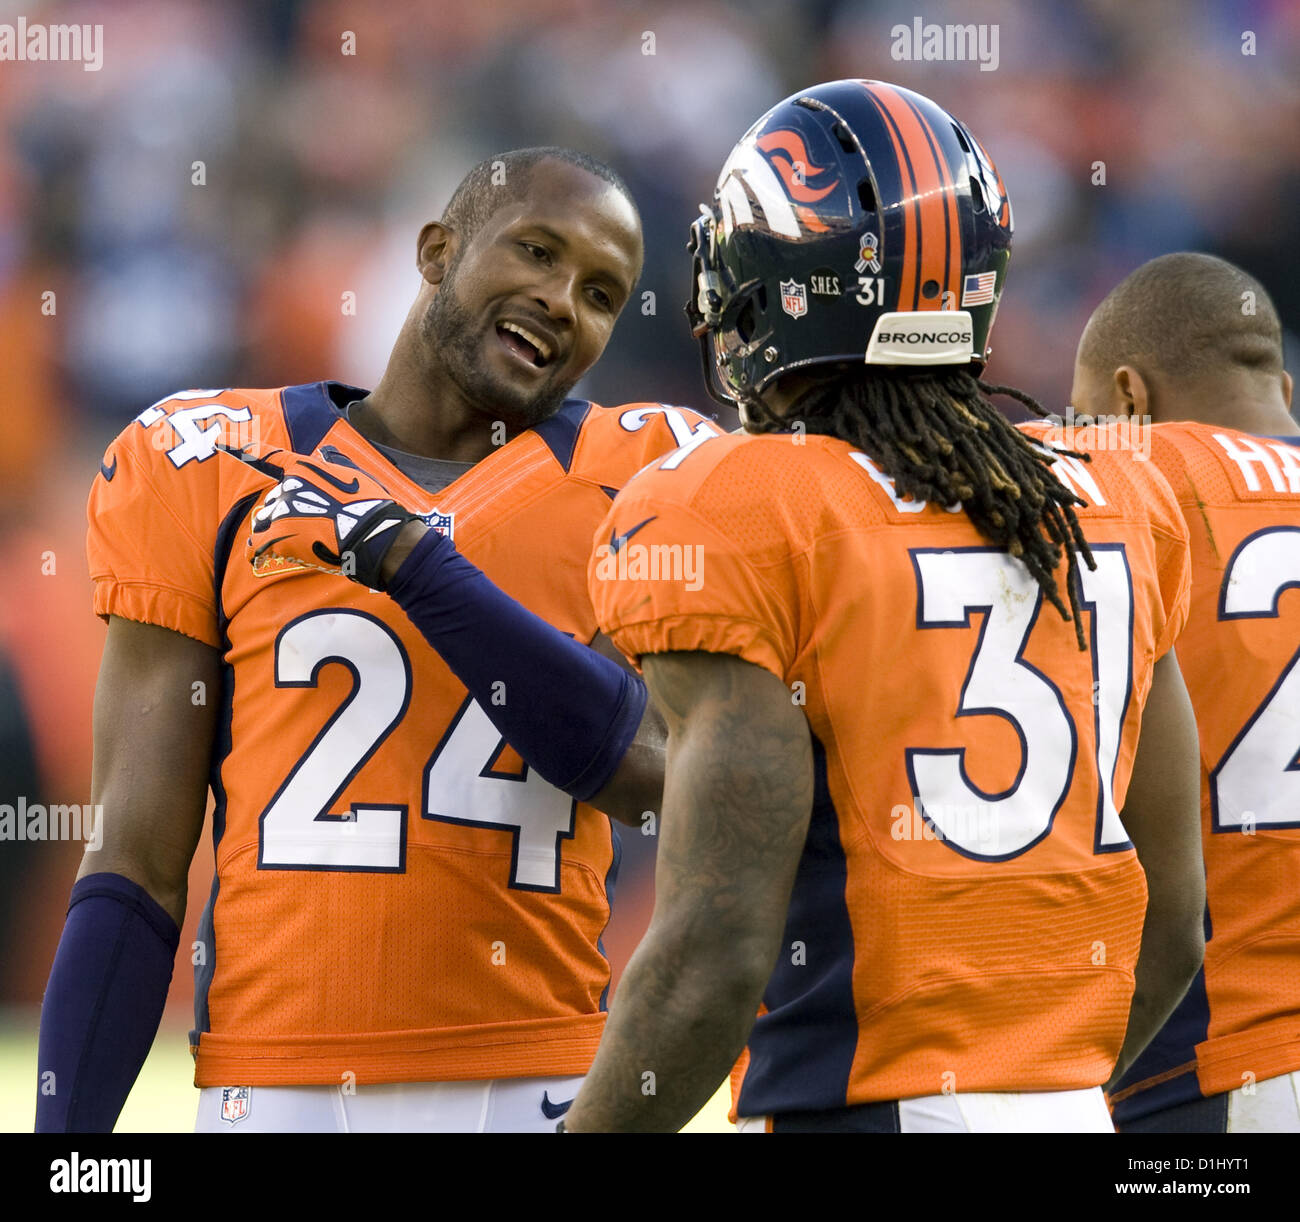 Dec. 23, 2012 - Denver, CO, USA - Broncos CB CHAMP BAILEY, left, talks to team mate OMAR BOLDEN, right, about a blown coverage during the 2nd. half at the Sports Authority Field at Mile High Sunday afternoon. The Broncos beat the Browns 34-12. (Credit Image: © Hector Acevedo/ZUMAPRESS.com) Stock Photo